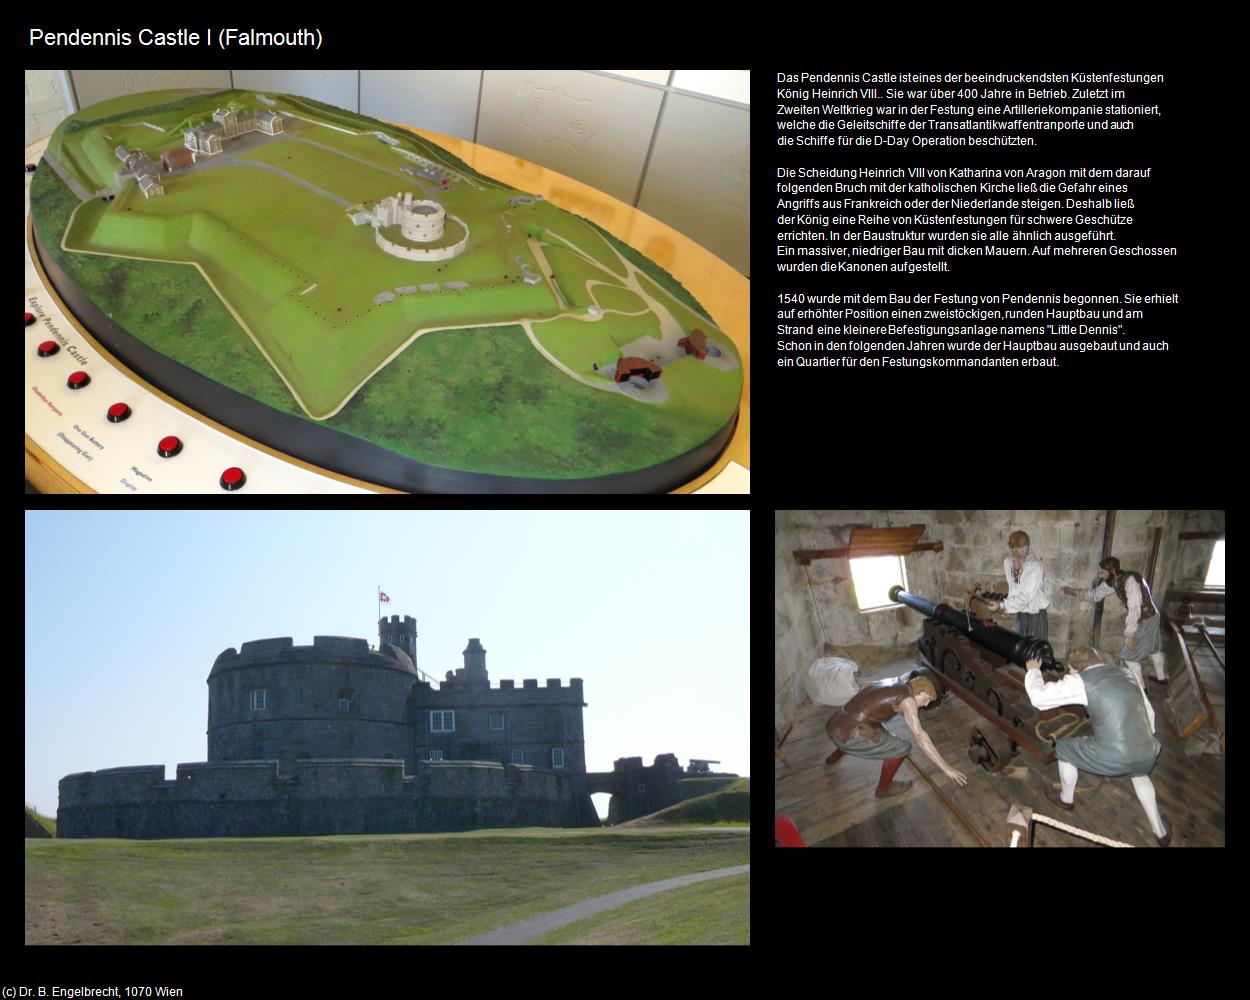 Pendennis Castle I (Falmouth, England) in Kulturatlas-ENGLAND und WALES